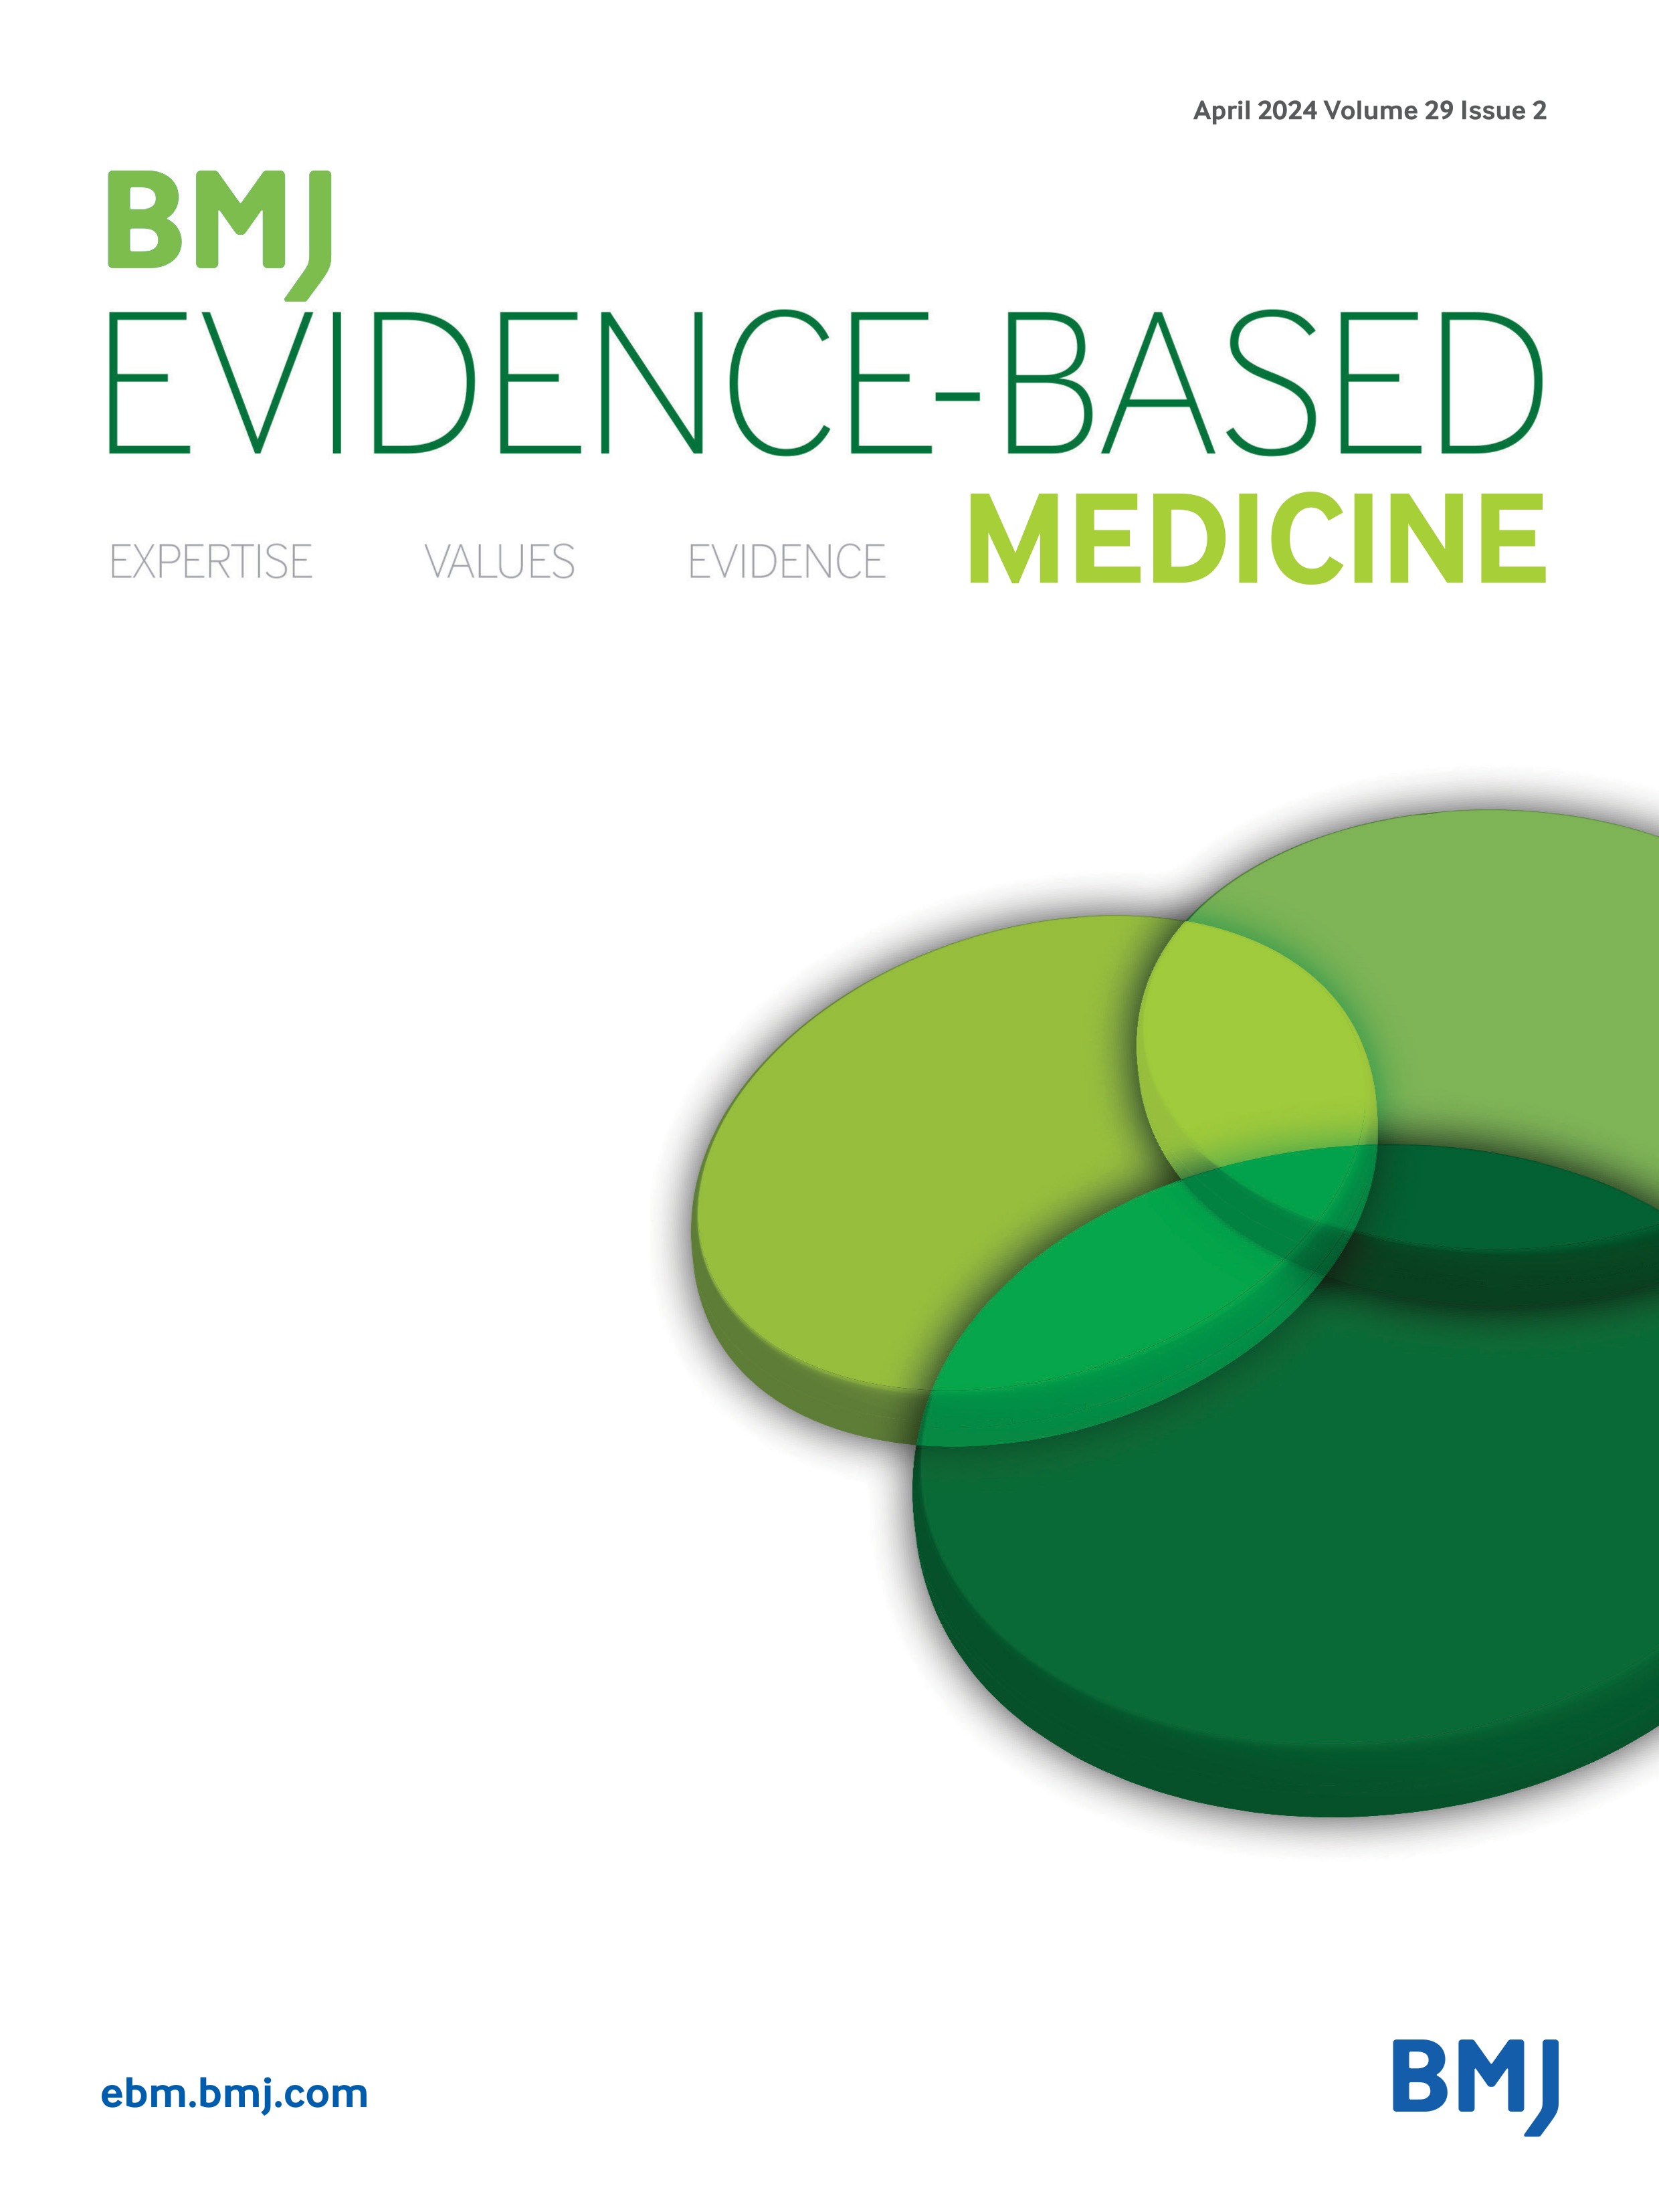 Dynamic intervention strategies await inclusion in clinical evidence synthesis